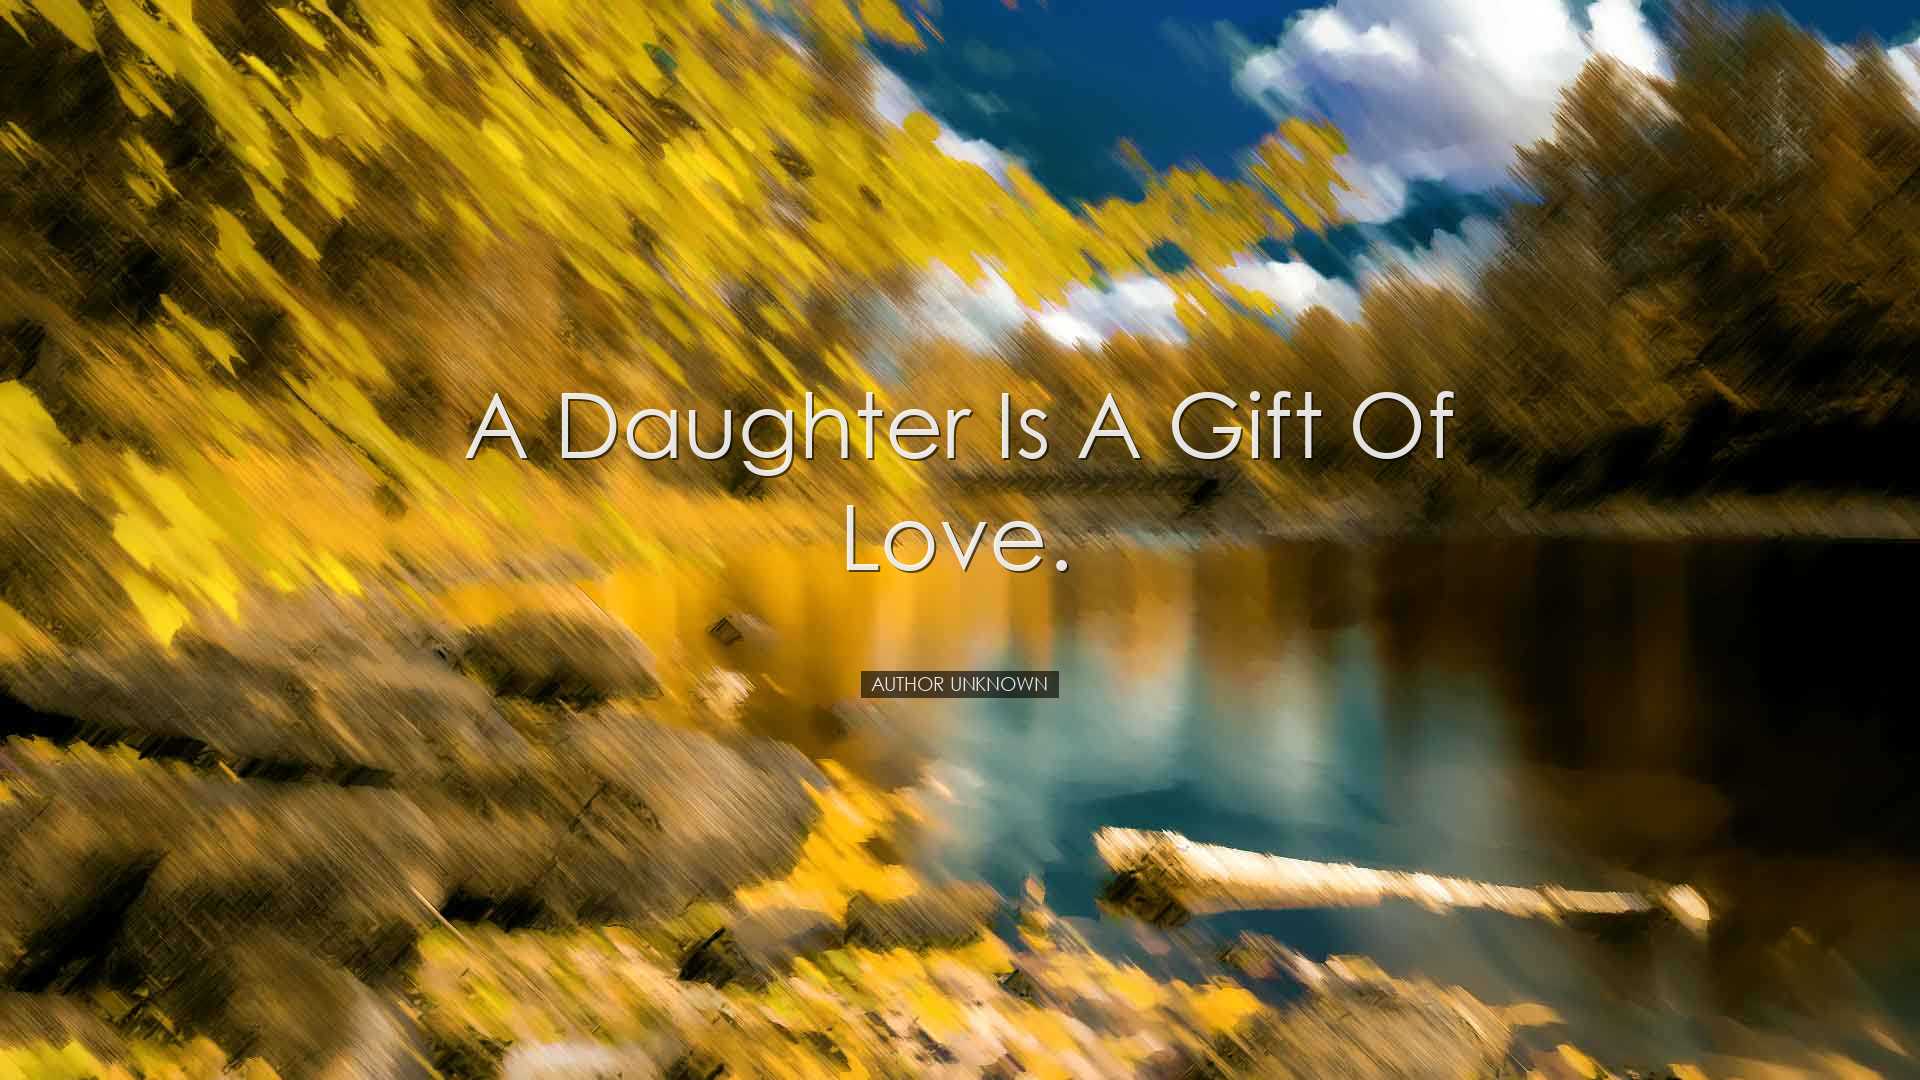 A daughter is a gift of love. - Author unknown